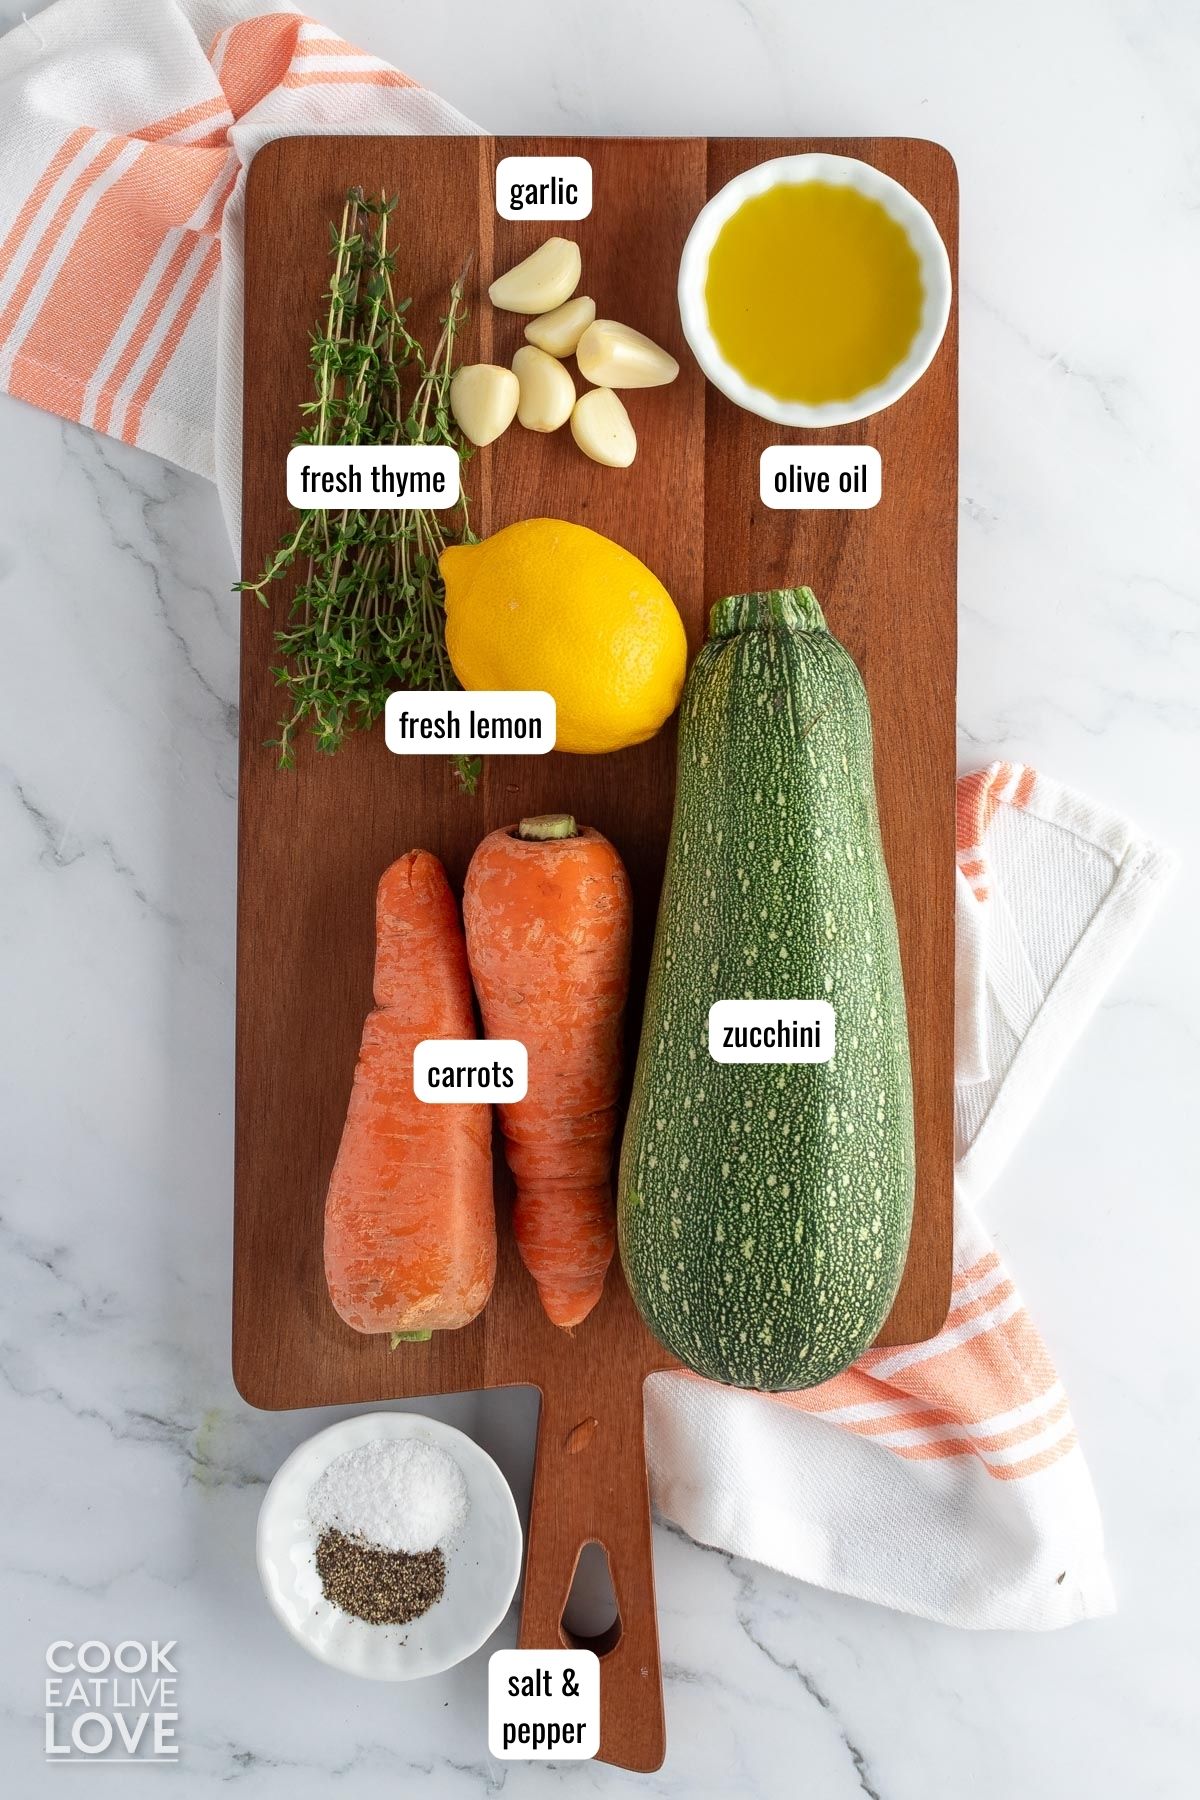 Ingredients to make roasted zucchini and carrots on a wooden cutting board on the table.